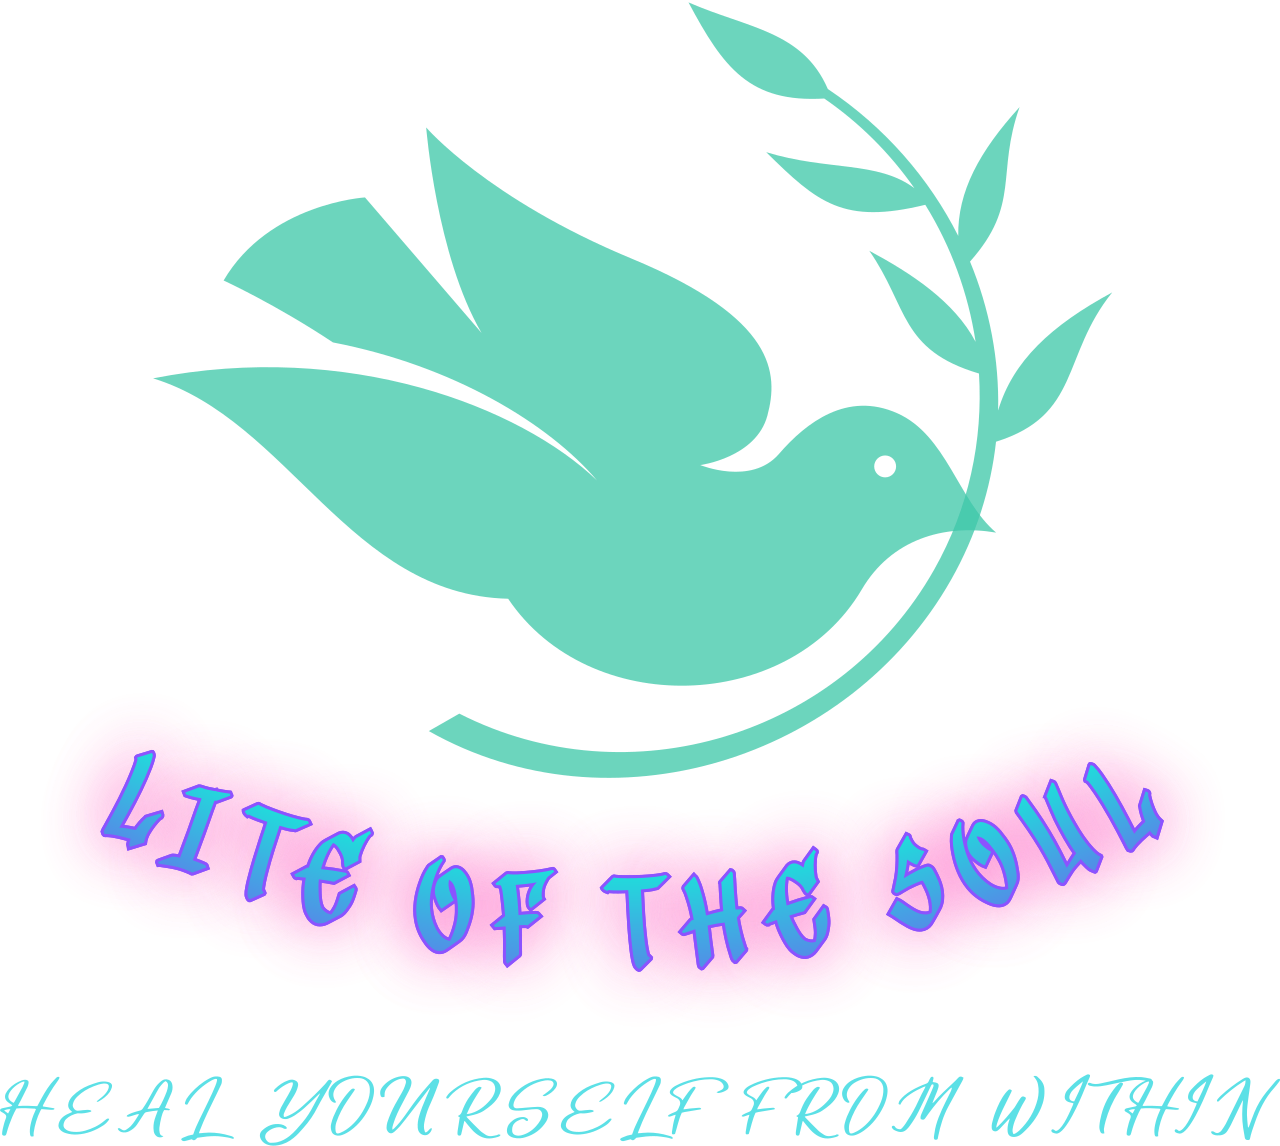 LITE OF THE SOUL: spiritual cleaning and healing's logo